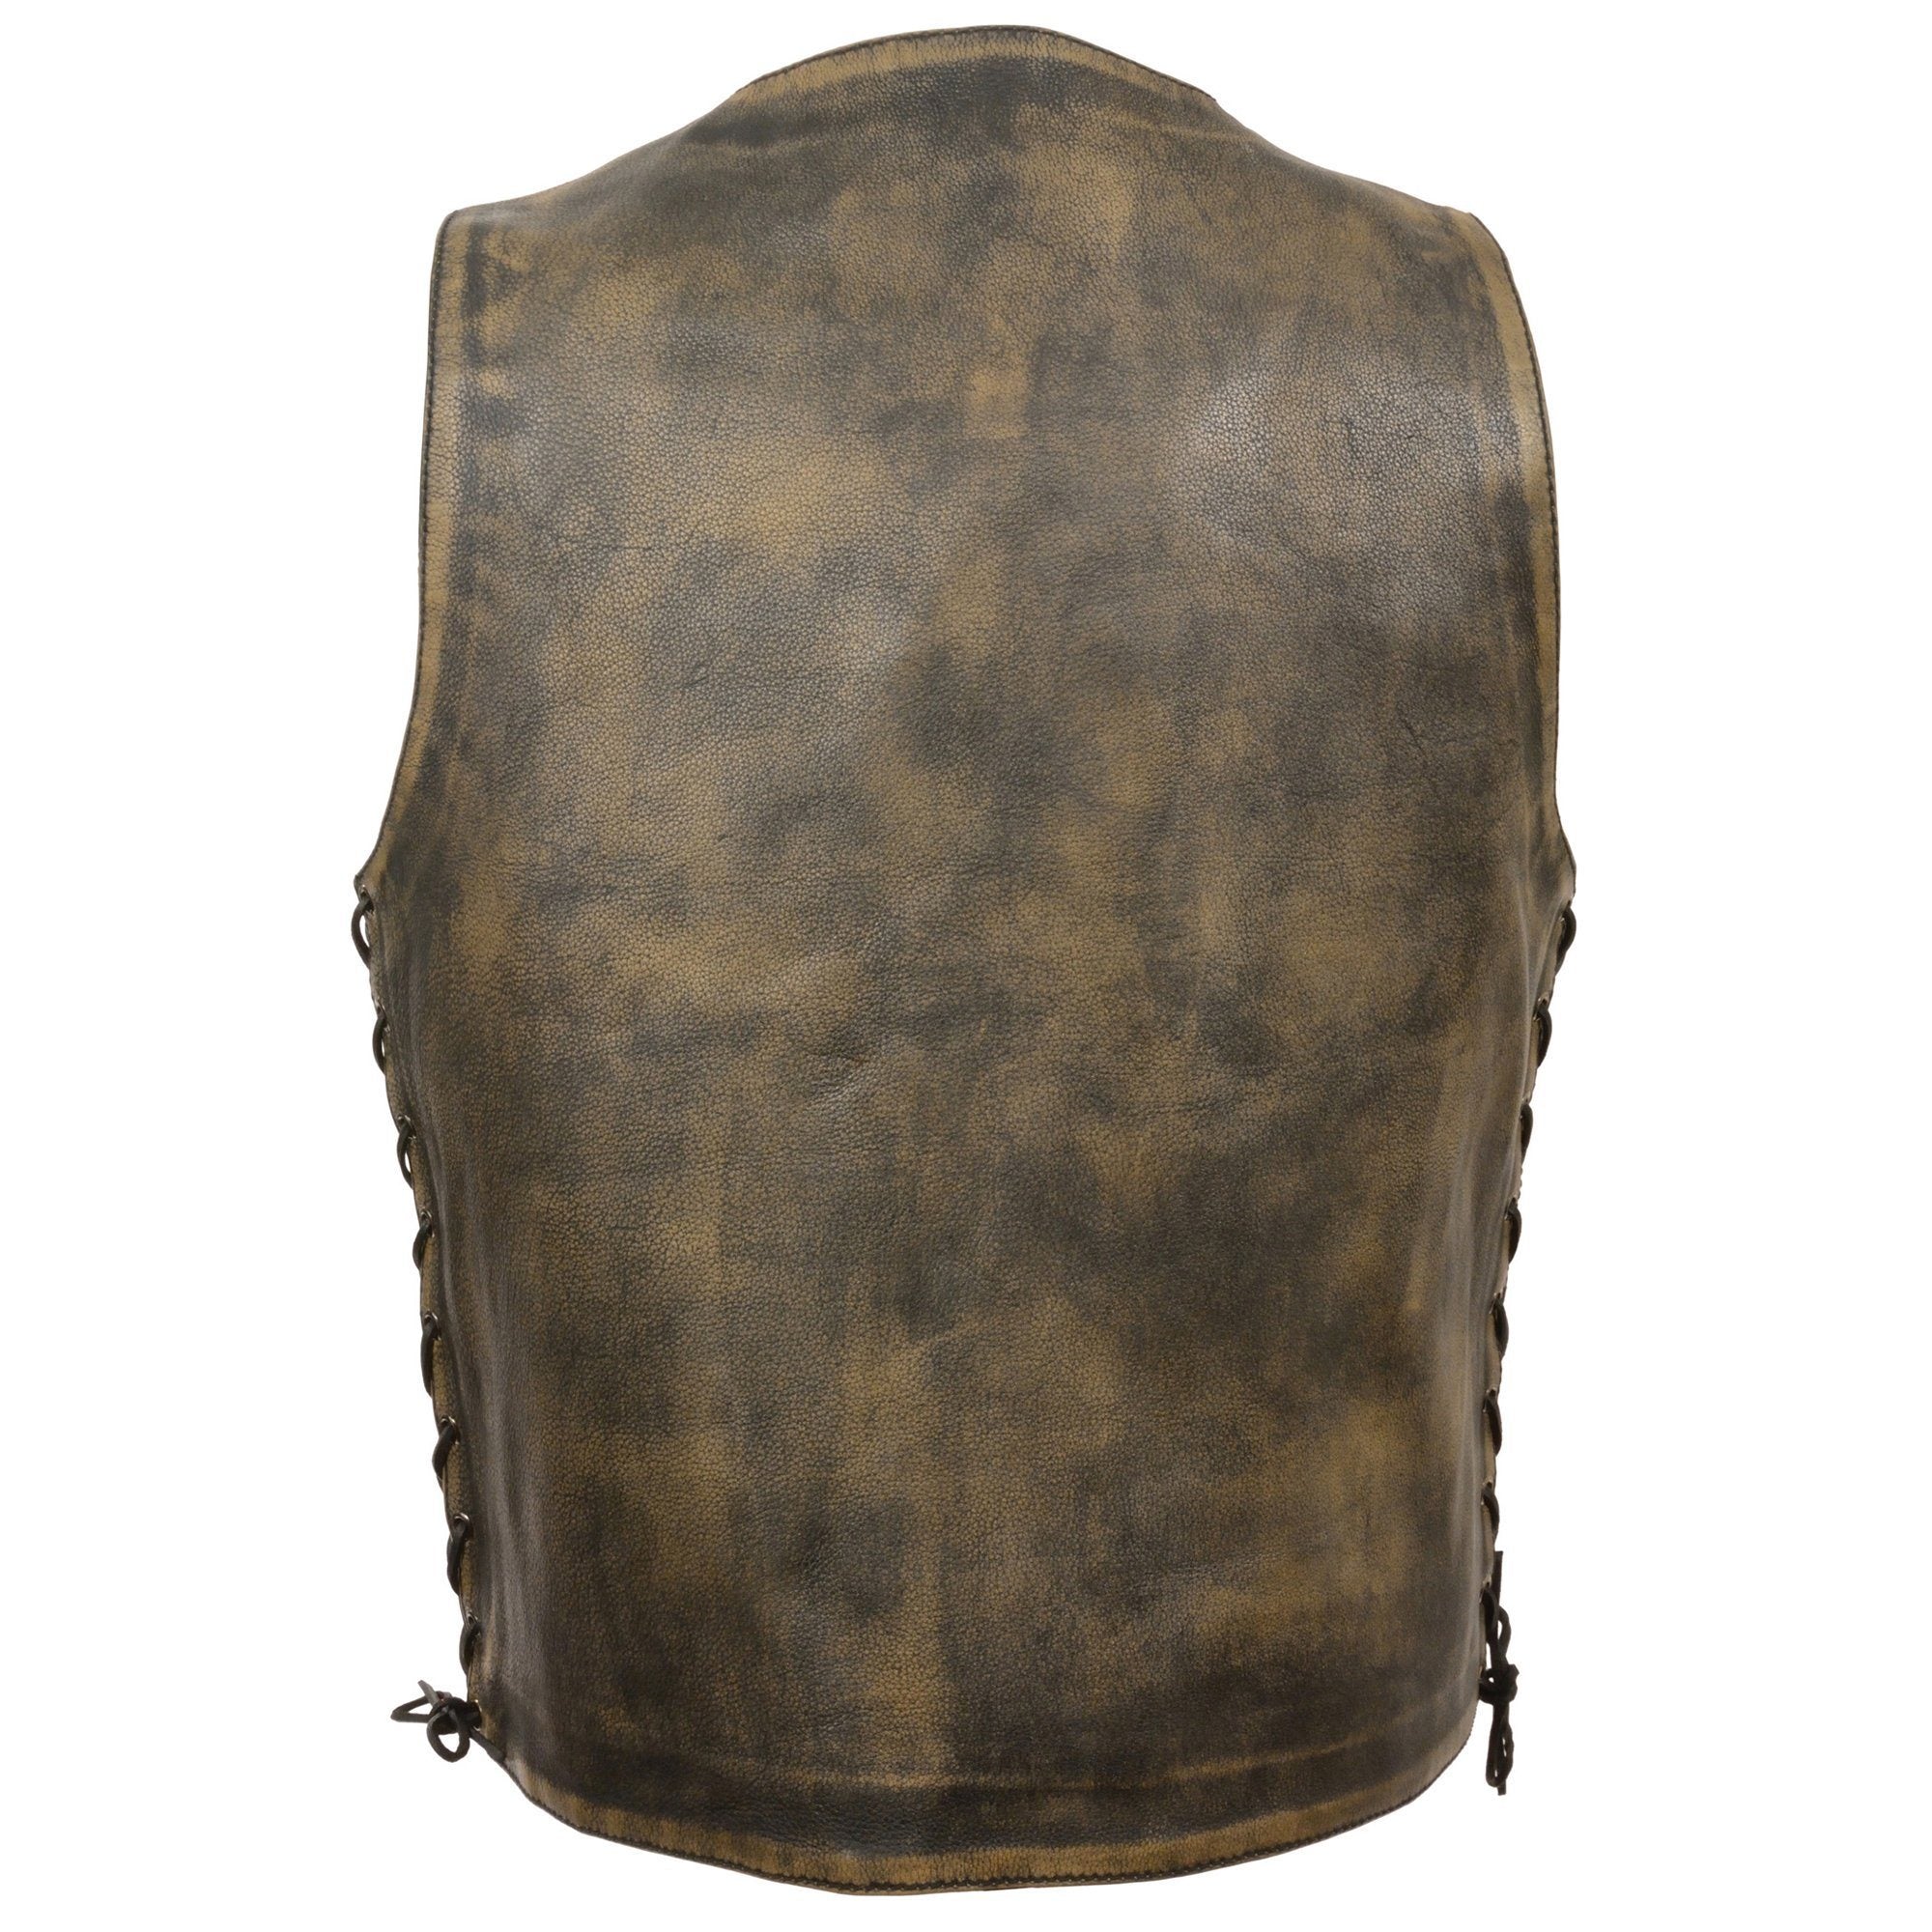 Milwaukee Leather MLM3540 Men's Distressed Brown 10 Pocket Leather Vest with Gun Pockets - Milwaukee Leather Mens Leather Vests